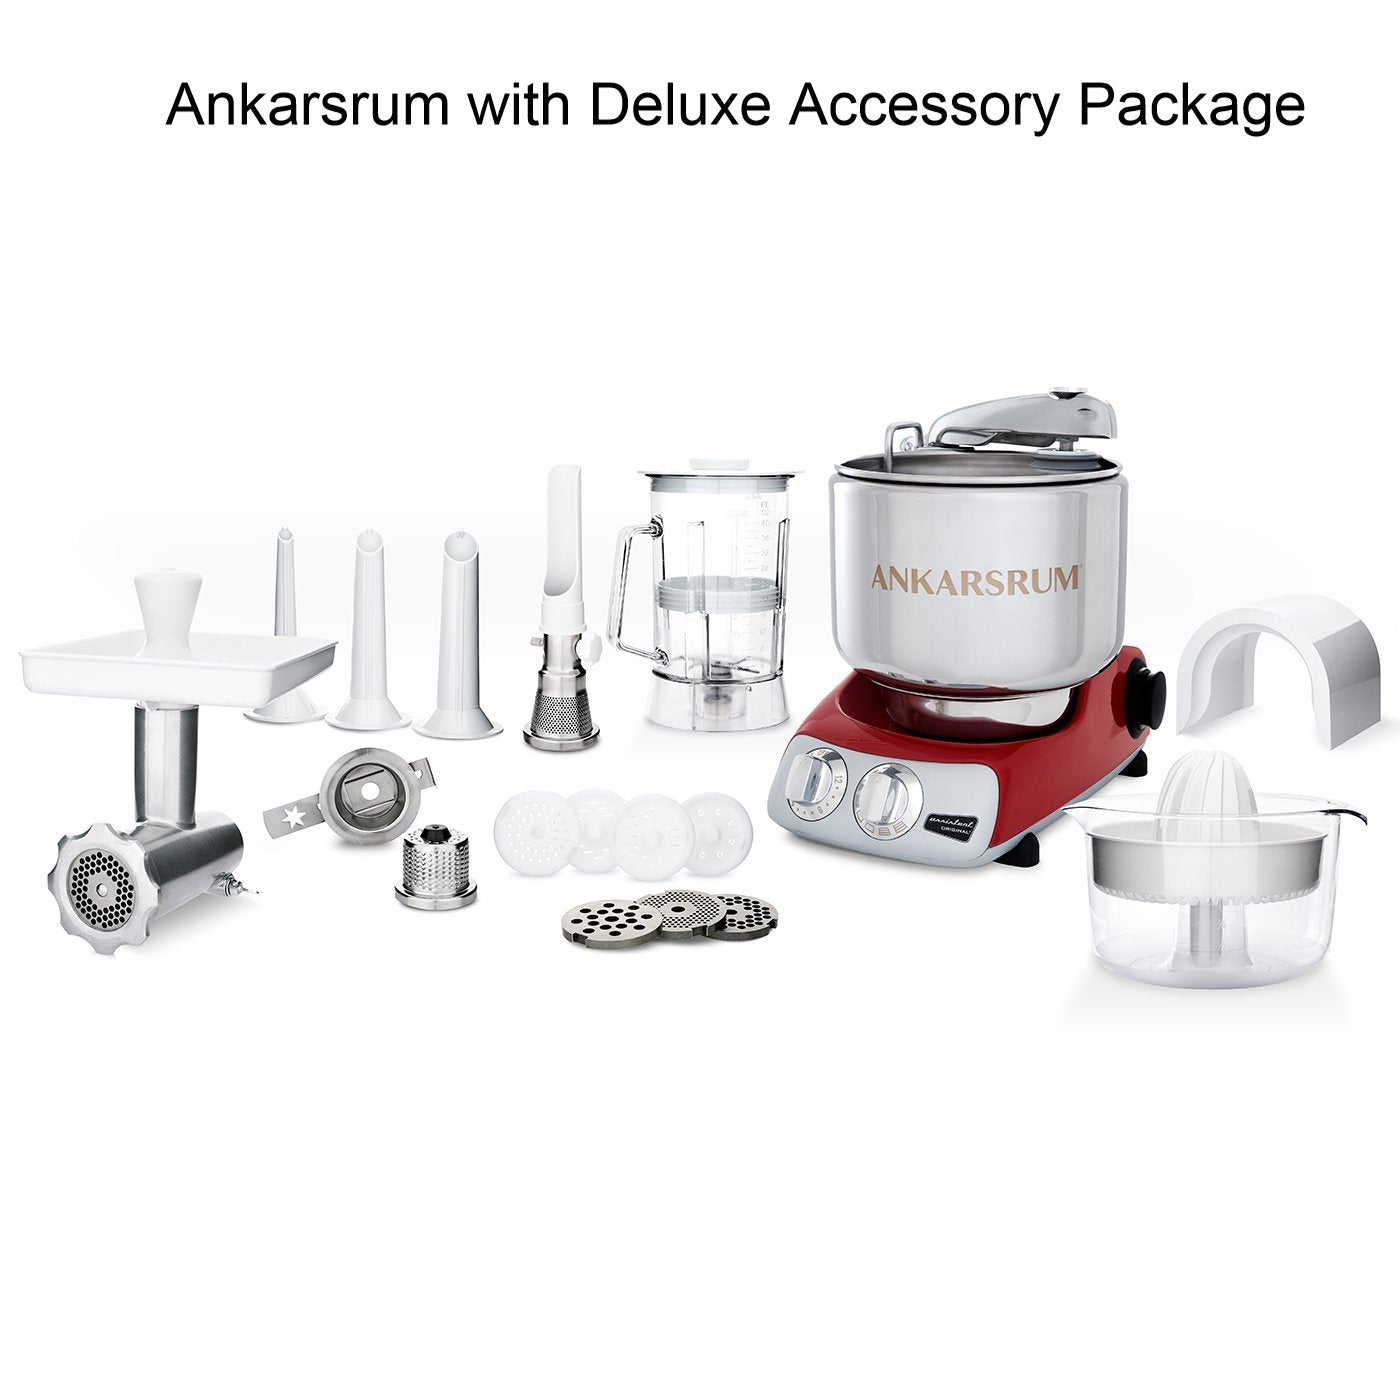 Ankarsrum Deluxe Accessory Package